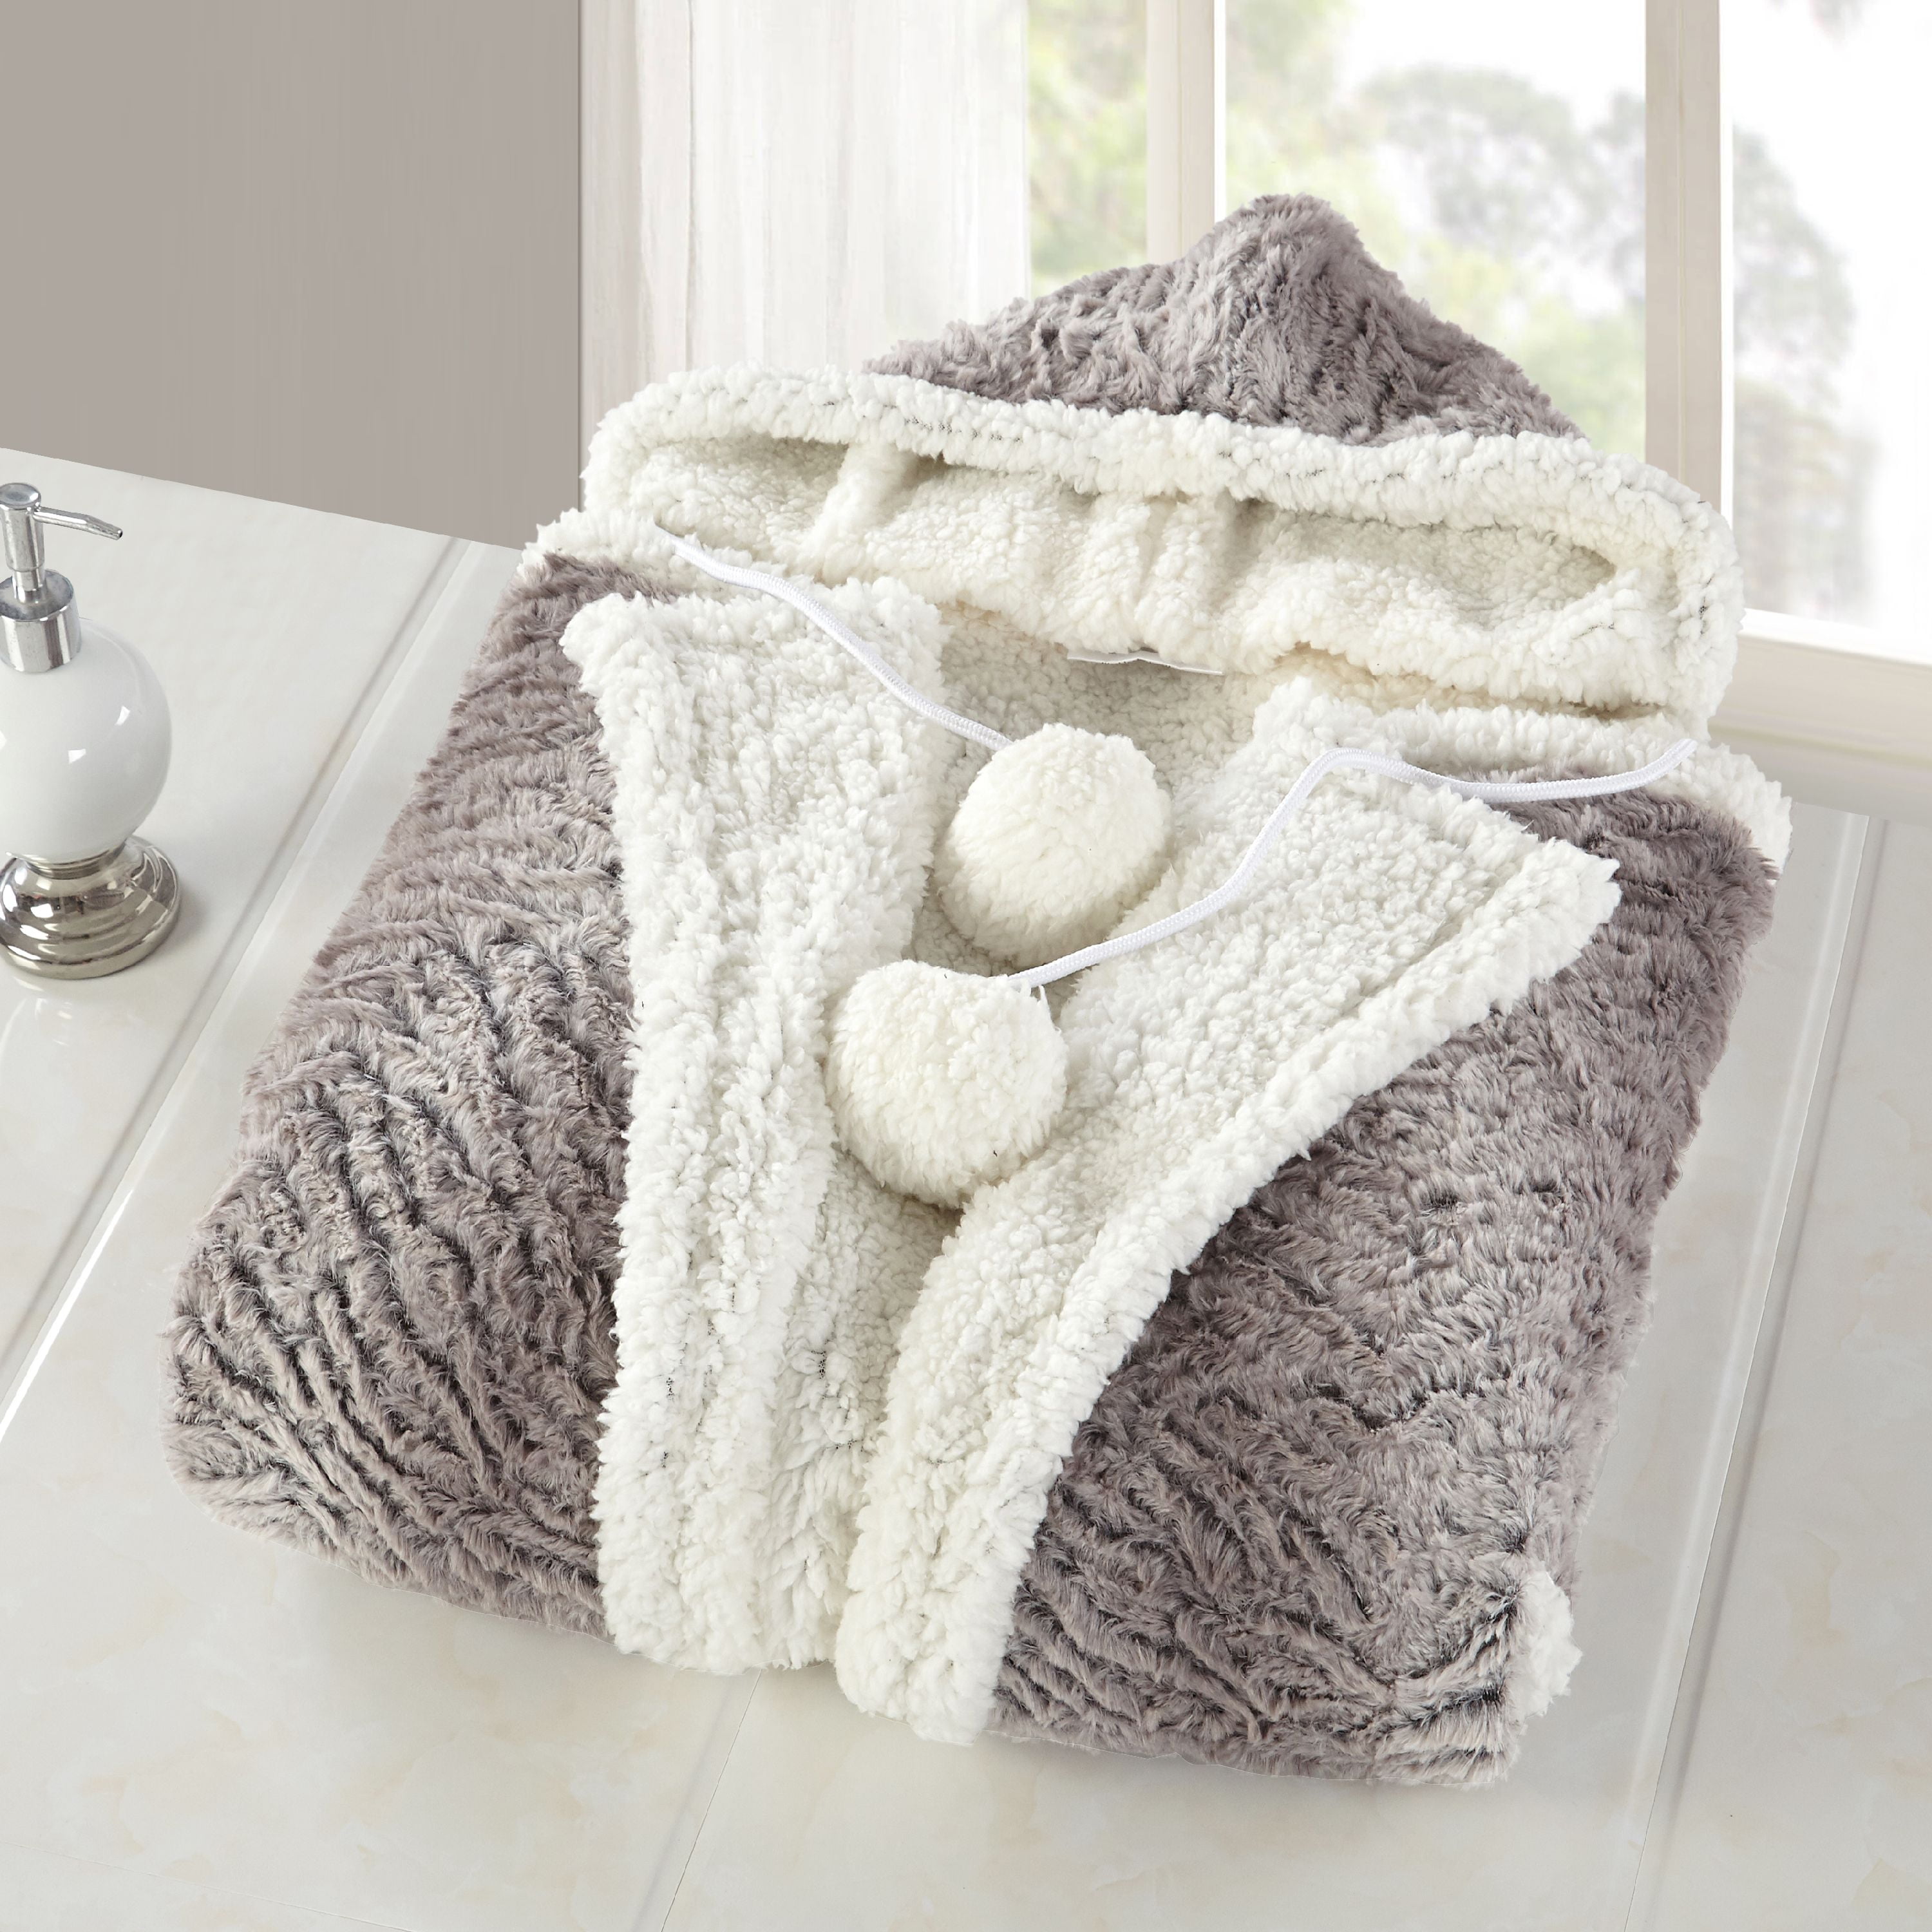 4 COLOURS LUXURY SUPER SOFT SHERPA FAUX FUR HOODED SNUGGLE BLANKET THROW 